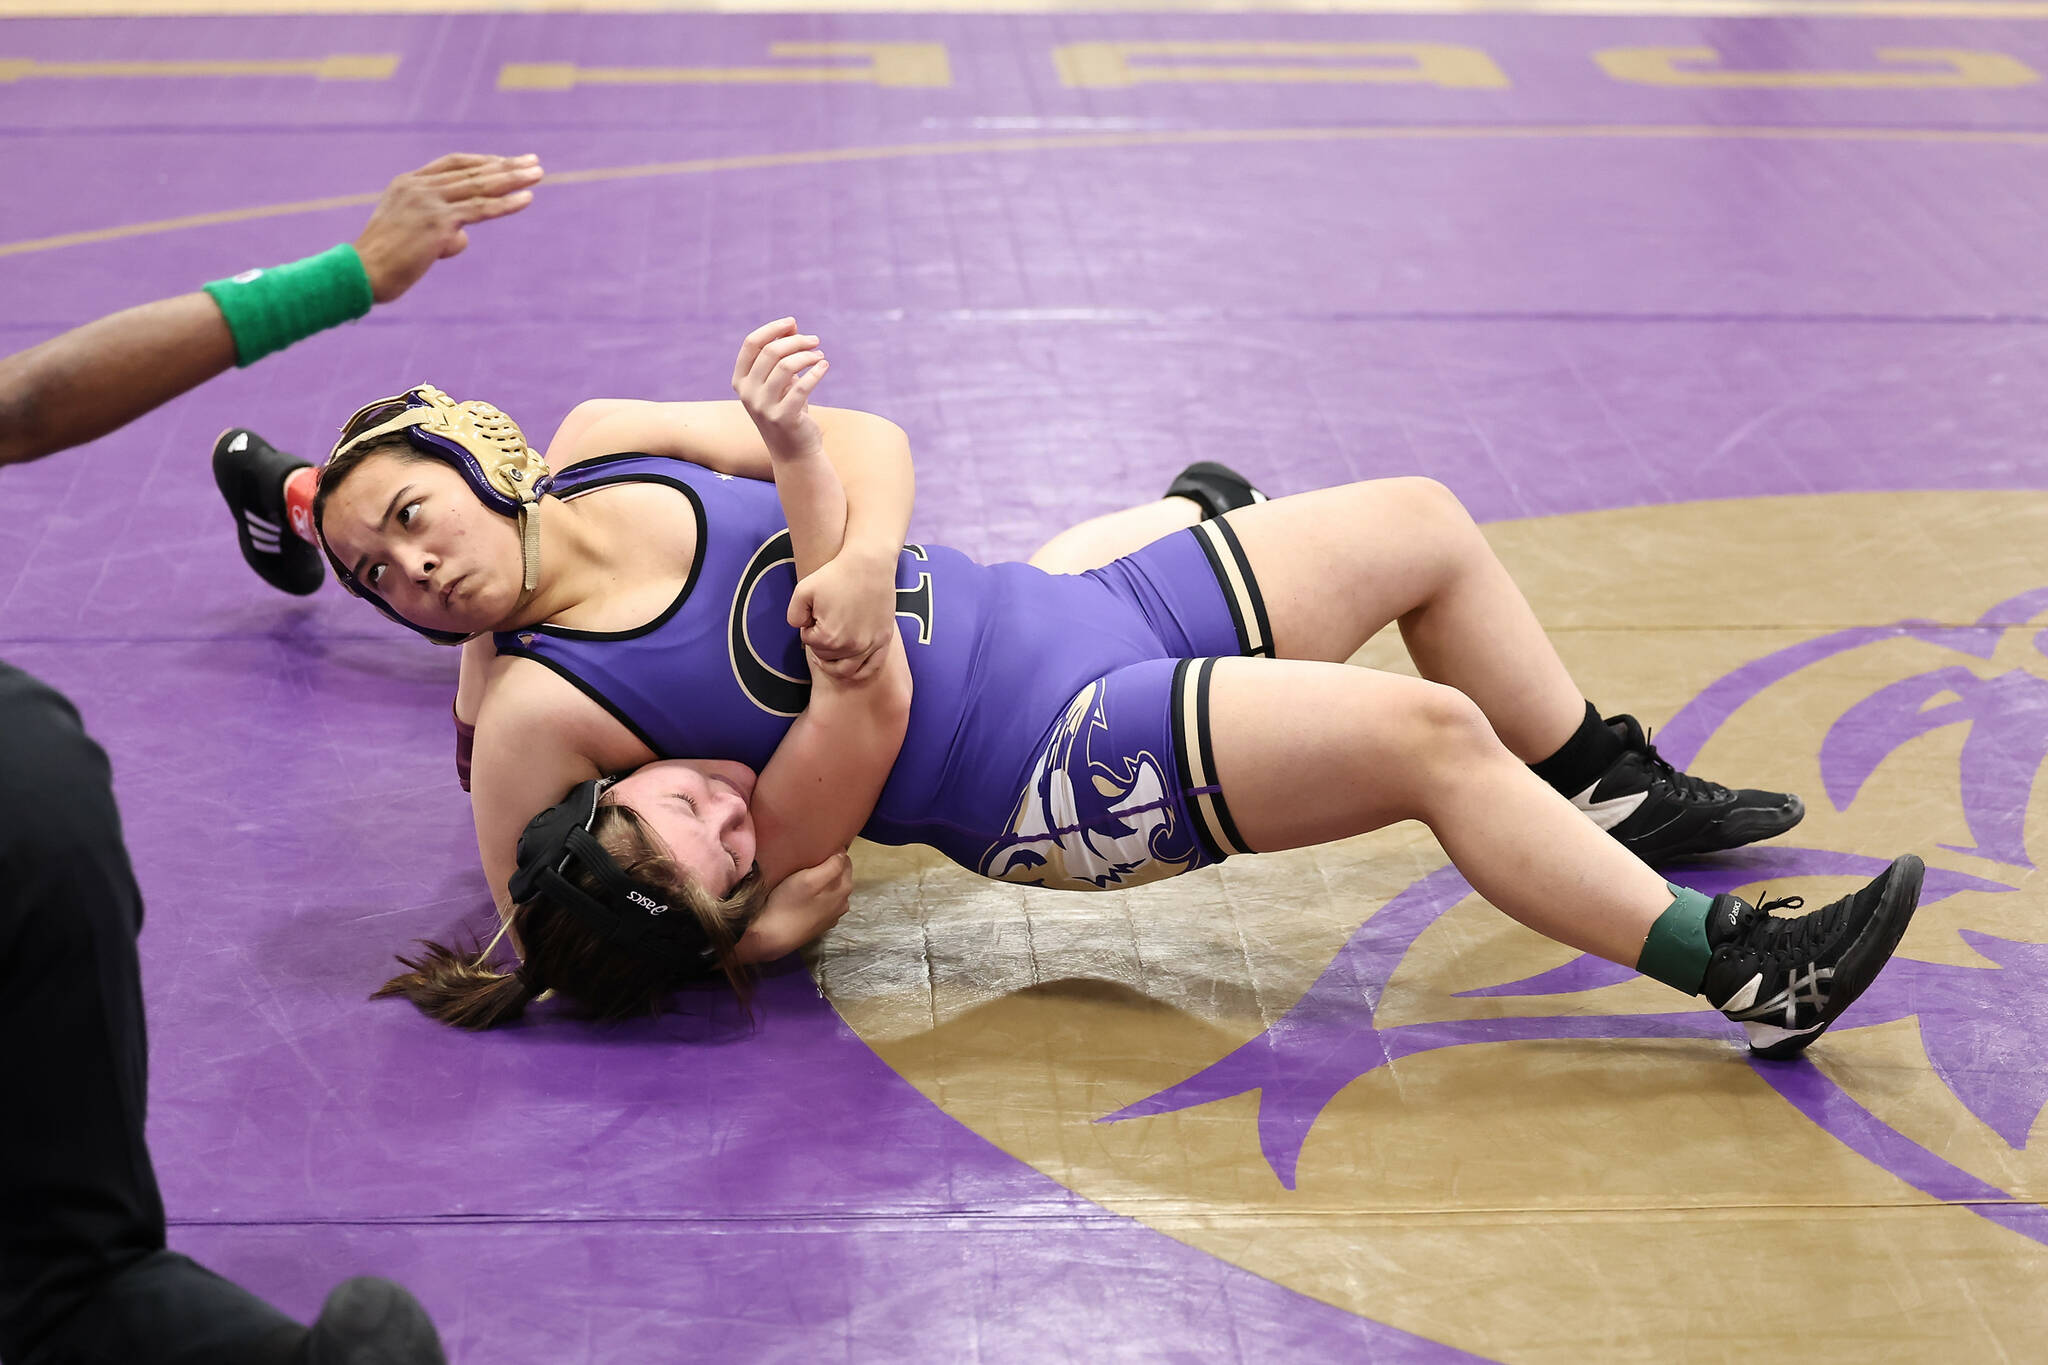 Photo by John Fisken
Oak Harbor student athlete Johanna Cisco pins down an opponent from Lakewood at a Dec. 7 wrestling match. Oak Harbor defeated Lakewood 66-12 at the first competition of the season.